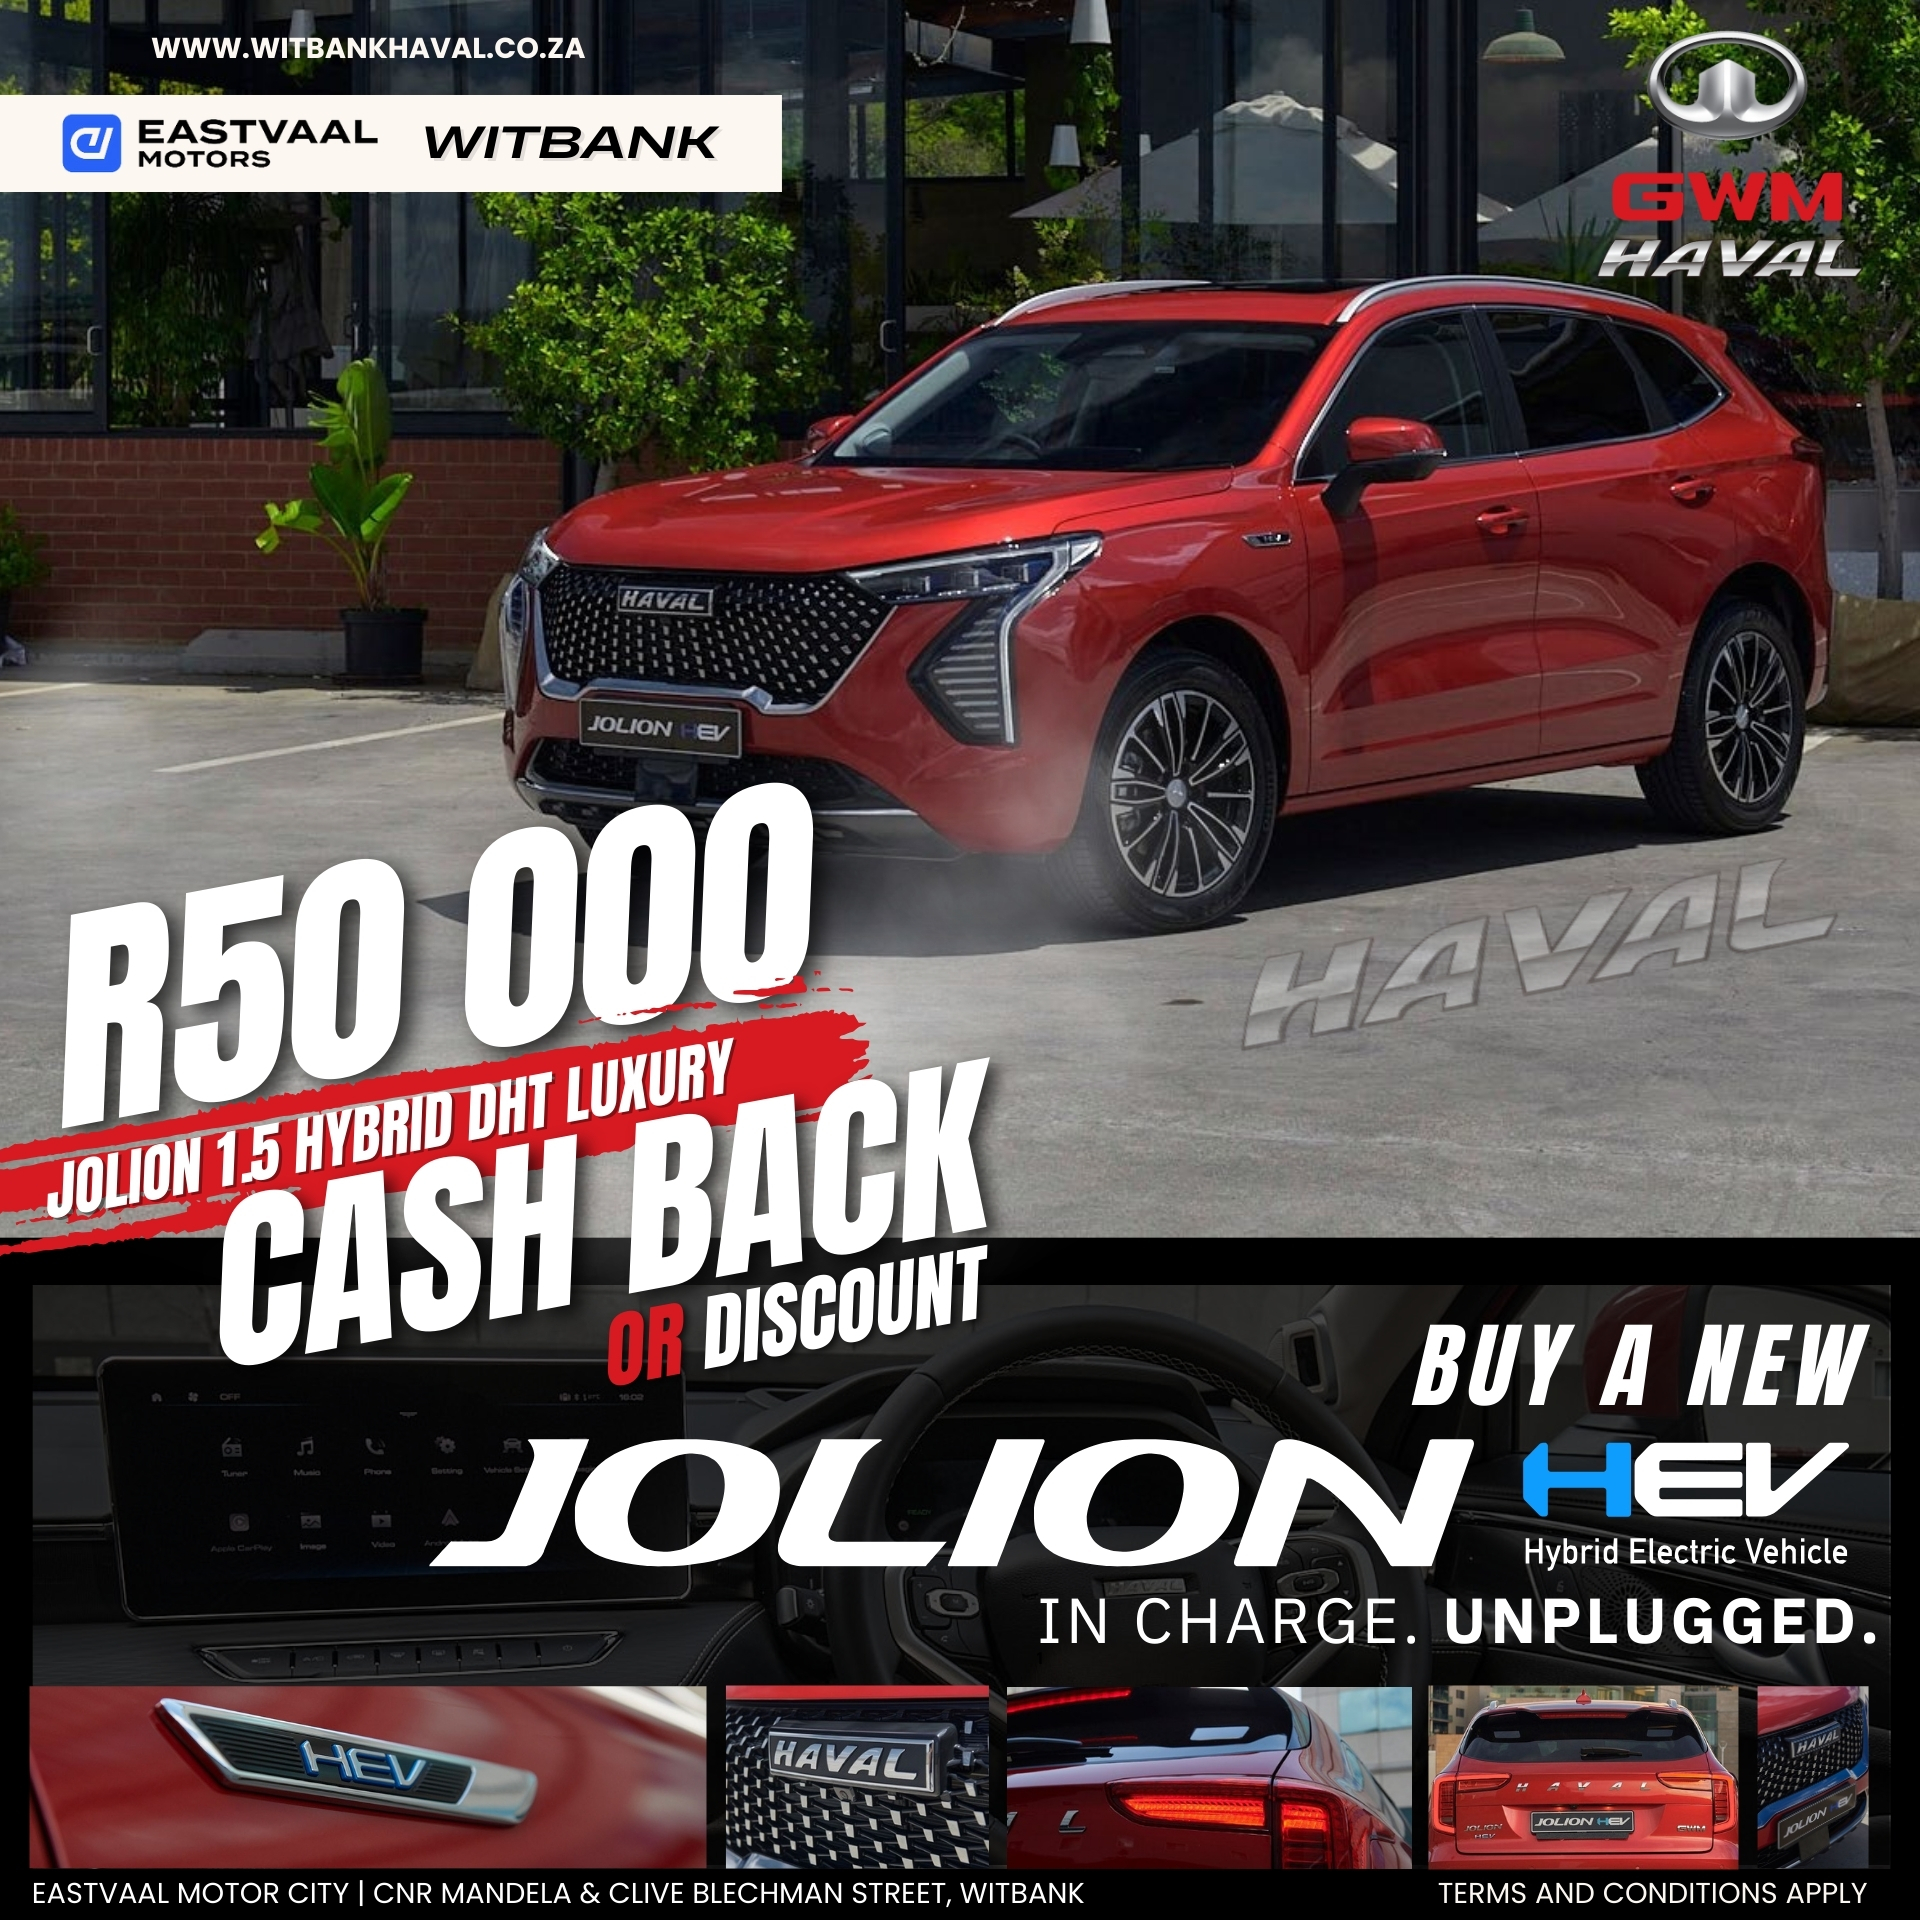 Haval Jolion HEV image from 